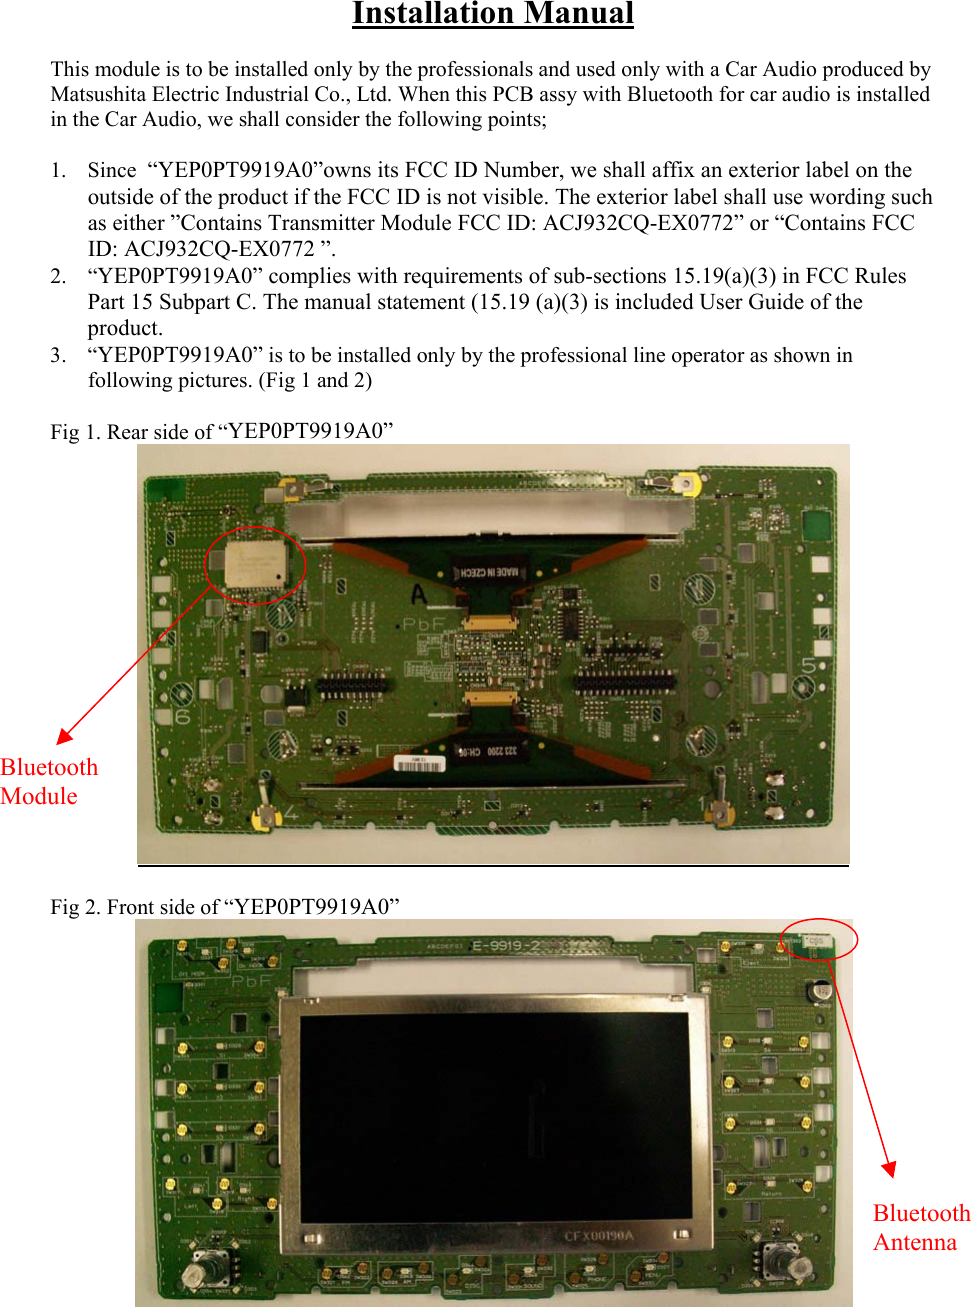 Installation Manual  This module is to be installed only by the professionals and used only with a Car Audio produced by Matsushita Electric Industrial Co., Ltd. When this PCB assy with Bluetooth for car audio is installed in the Car Audio, we shall consider the following points;  1. Since  “YEP0PT9919A0”owns its FCC ID Number, we shall affix an exterior label on the outside of the product if the FCC ID is not visible. The exterior label shall use wording such as either ”Contains Transmitter Module FCC ID: ACJ932CQ-EX0772” or “Contains FCC ID: ACJ932CQ-EX0772 ”. 2. “YEP0PT9919A0” complies with requirements of sub-sections 15.19(a)(3) in FCC Rules Part 15 Subpart C. The manual statement (15.19 (a)(3) is included User Guide of the product. 3. “YEP0PT9919A0” is to be installed only by the professional line operator as shown in following pictures. (Fig 1 and 2)  Fig 1. Rear side of “YEP0PT9919A0”   Fig 2. Front side of “YEP0PT9919A0” Bluetooth Module Bluetooth Antenna 